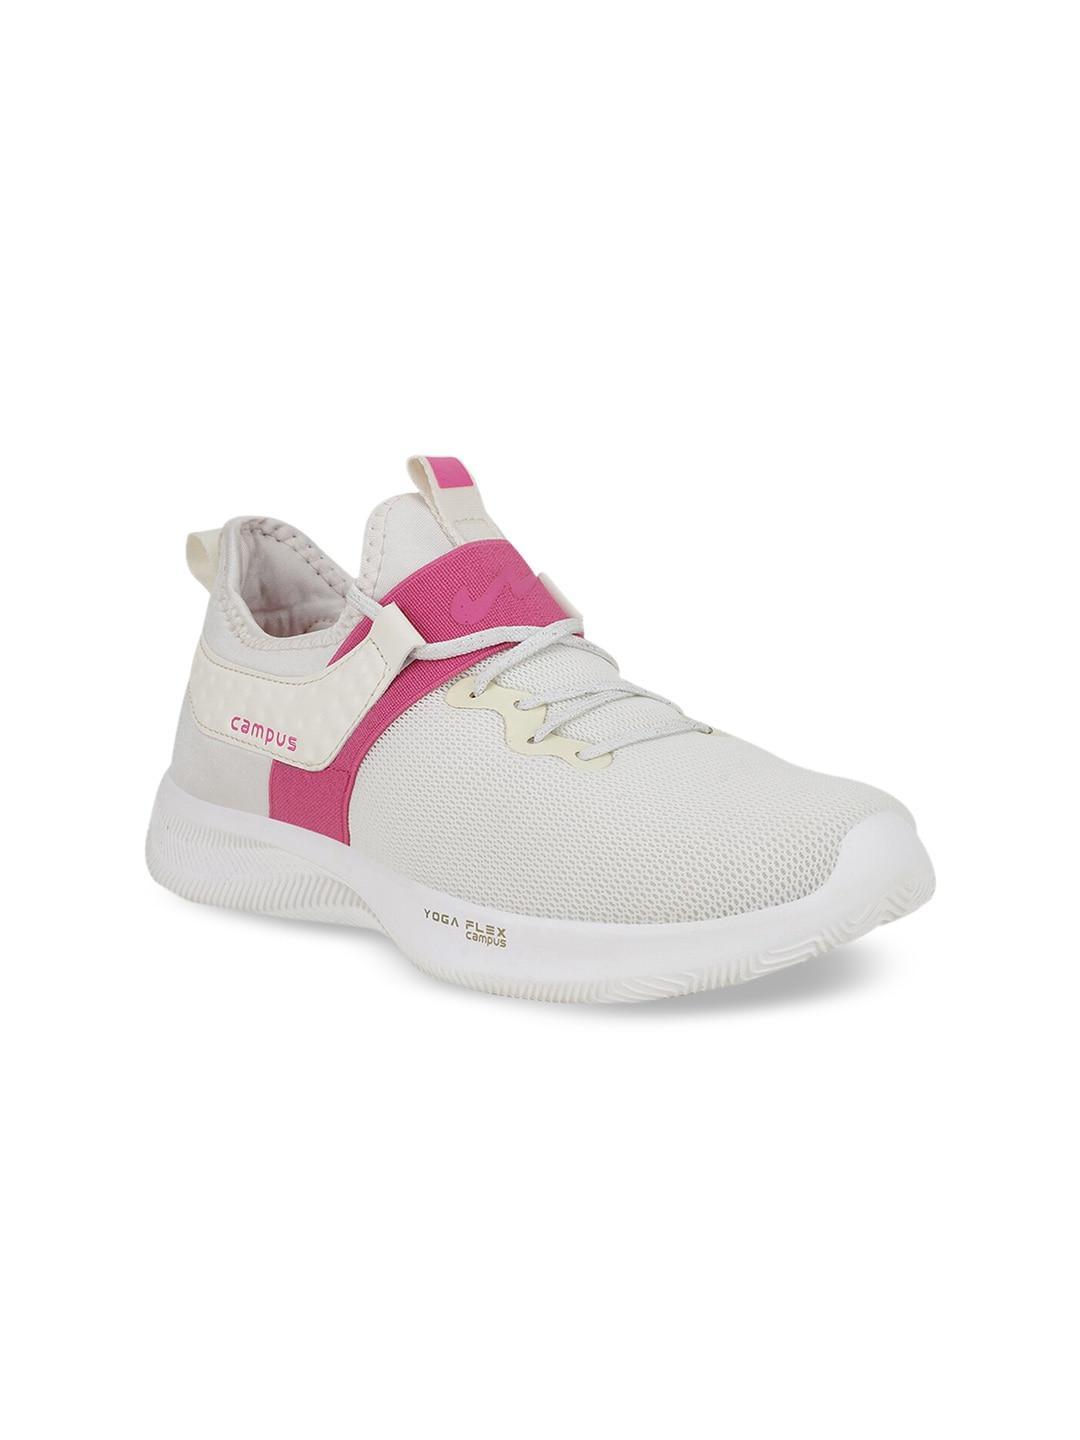 campus women off-white mesh mid-top running shoes